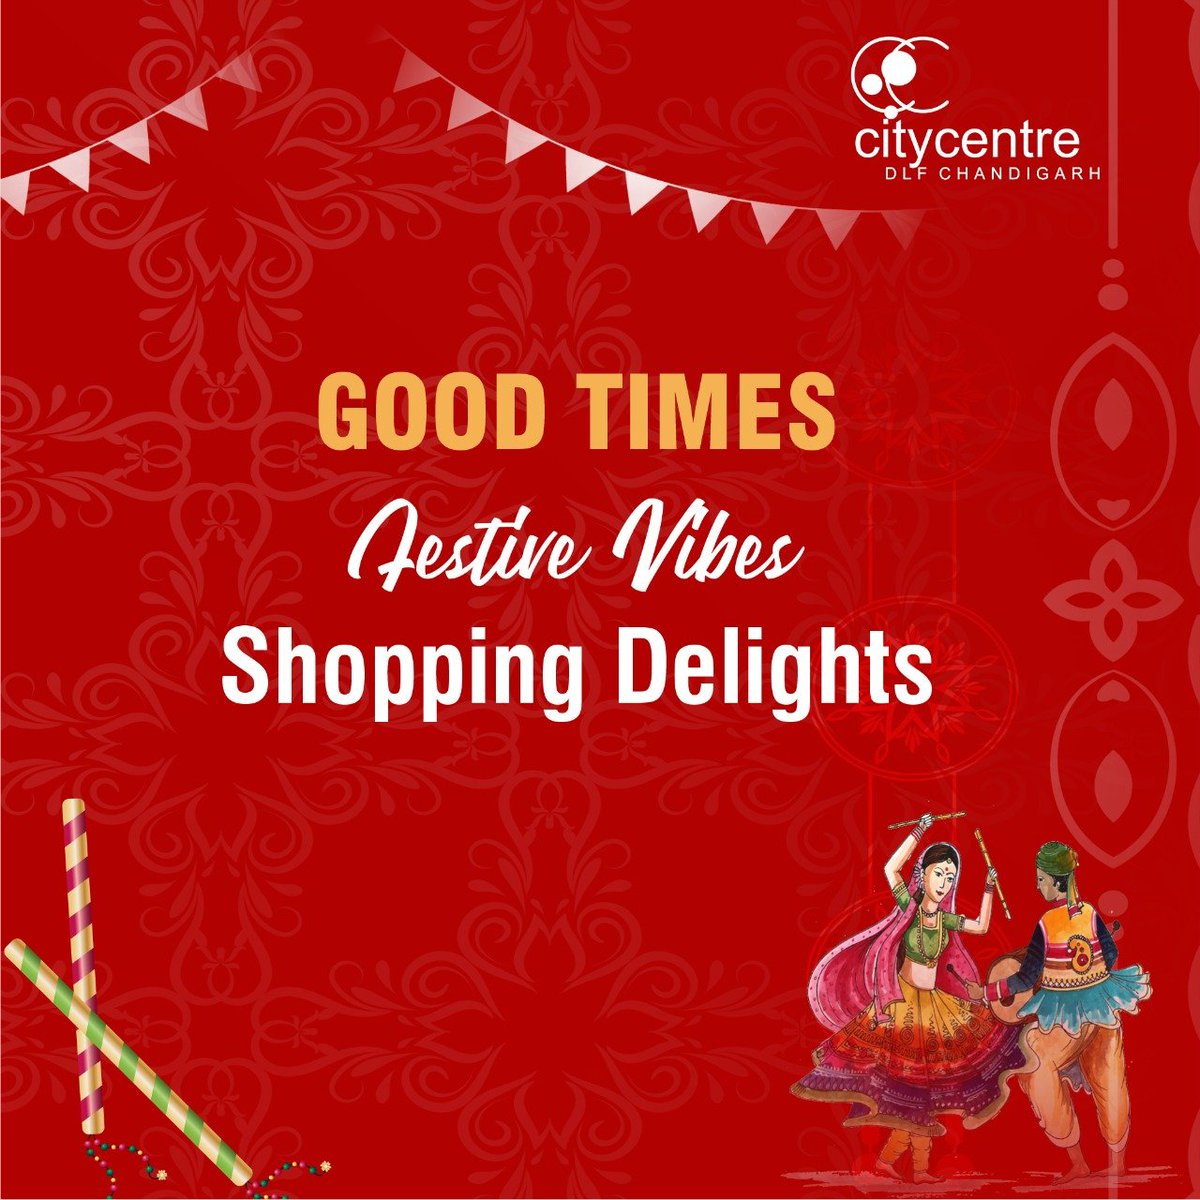 Setting a Shopping Fiesta!
Shop till You Drop with the Ultimate Festive Deals on Top Brands at DLF City Centre, Chandigarh.

#DLFCityCentreMall #ShoppingFiesta #FestiveDeals #TopBrands #ShoppingDelights #Panchkula #Chandigarh